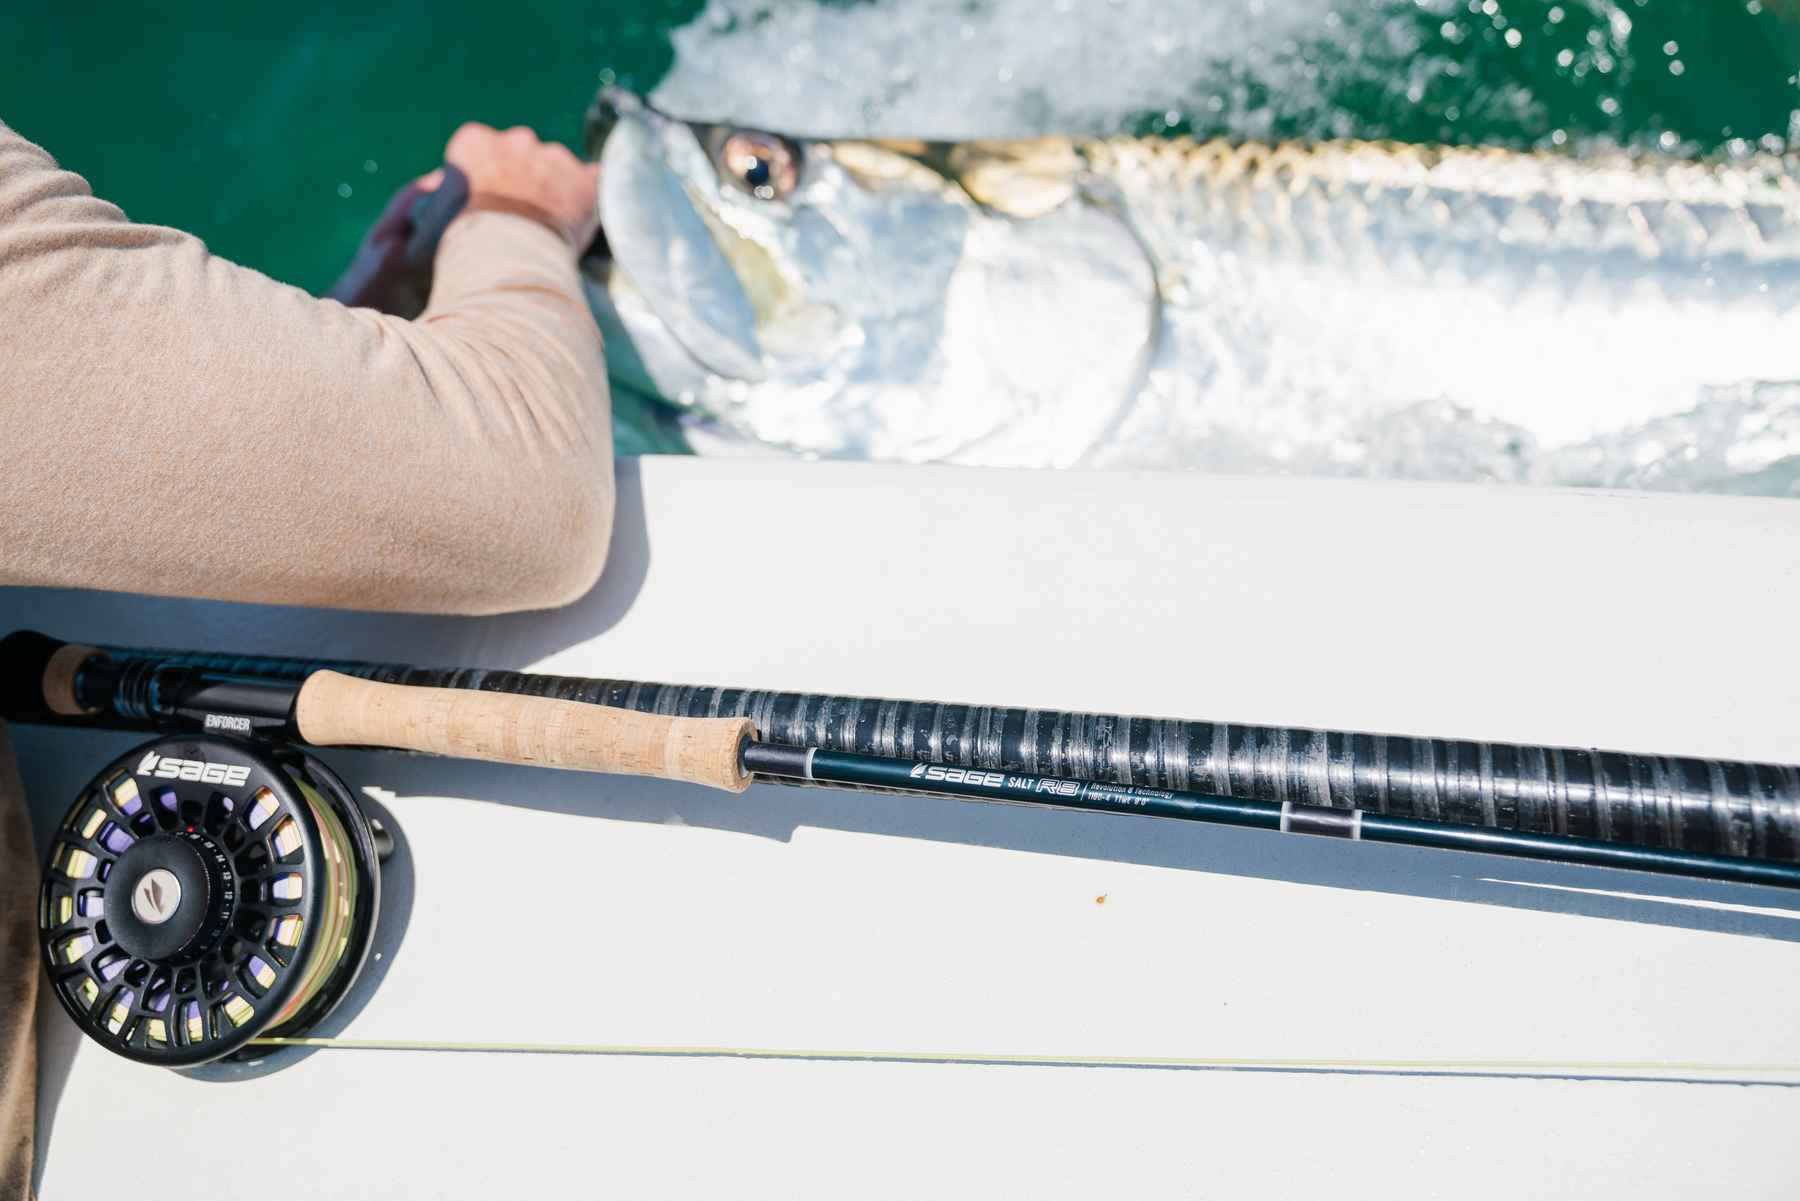 Find the Best Size and Weight Fly Rod - Trout to Tarpon